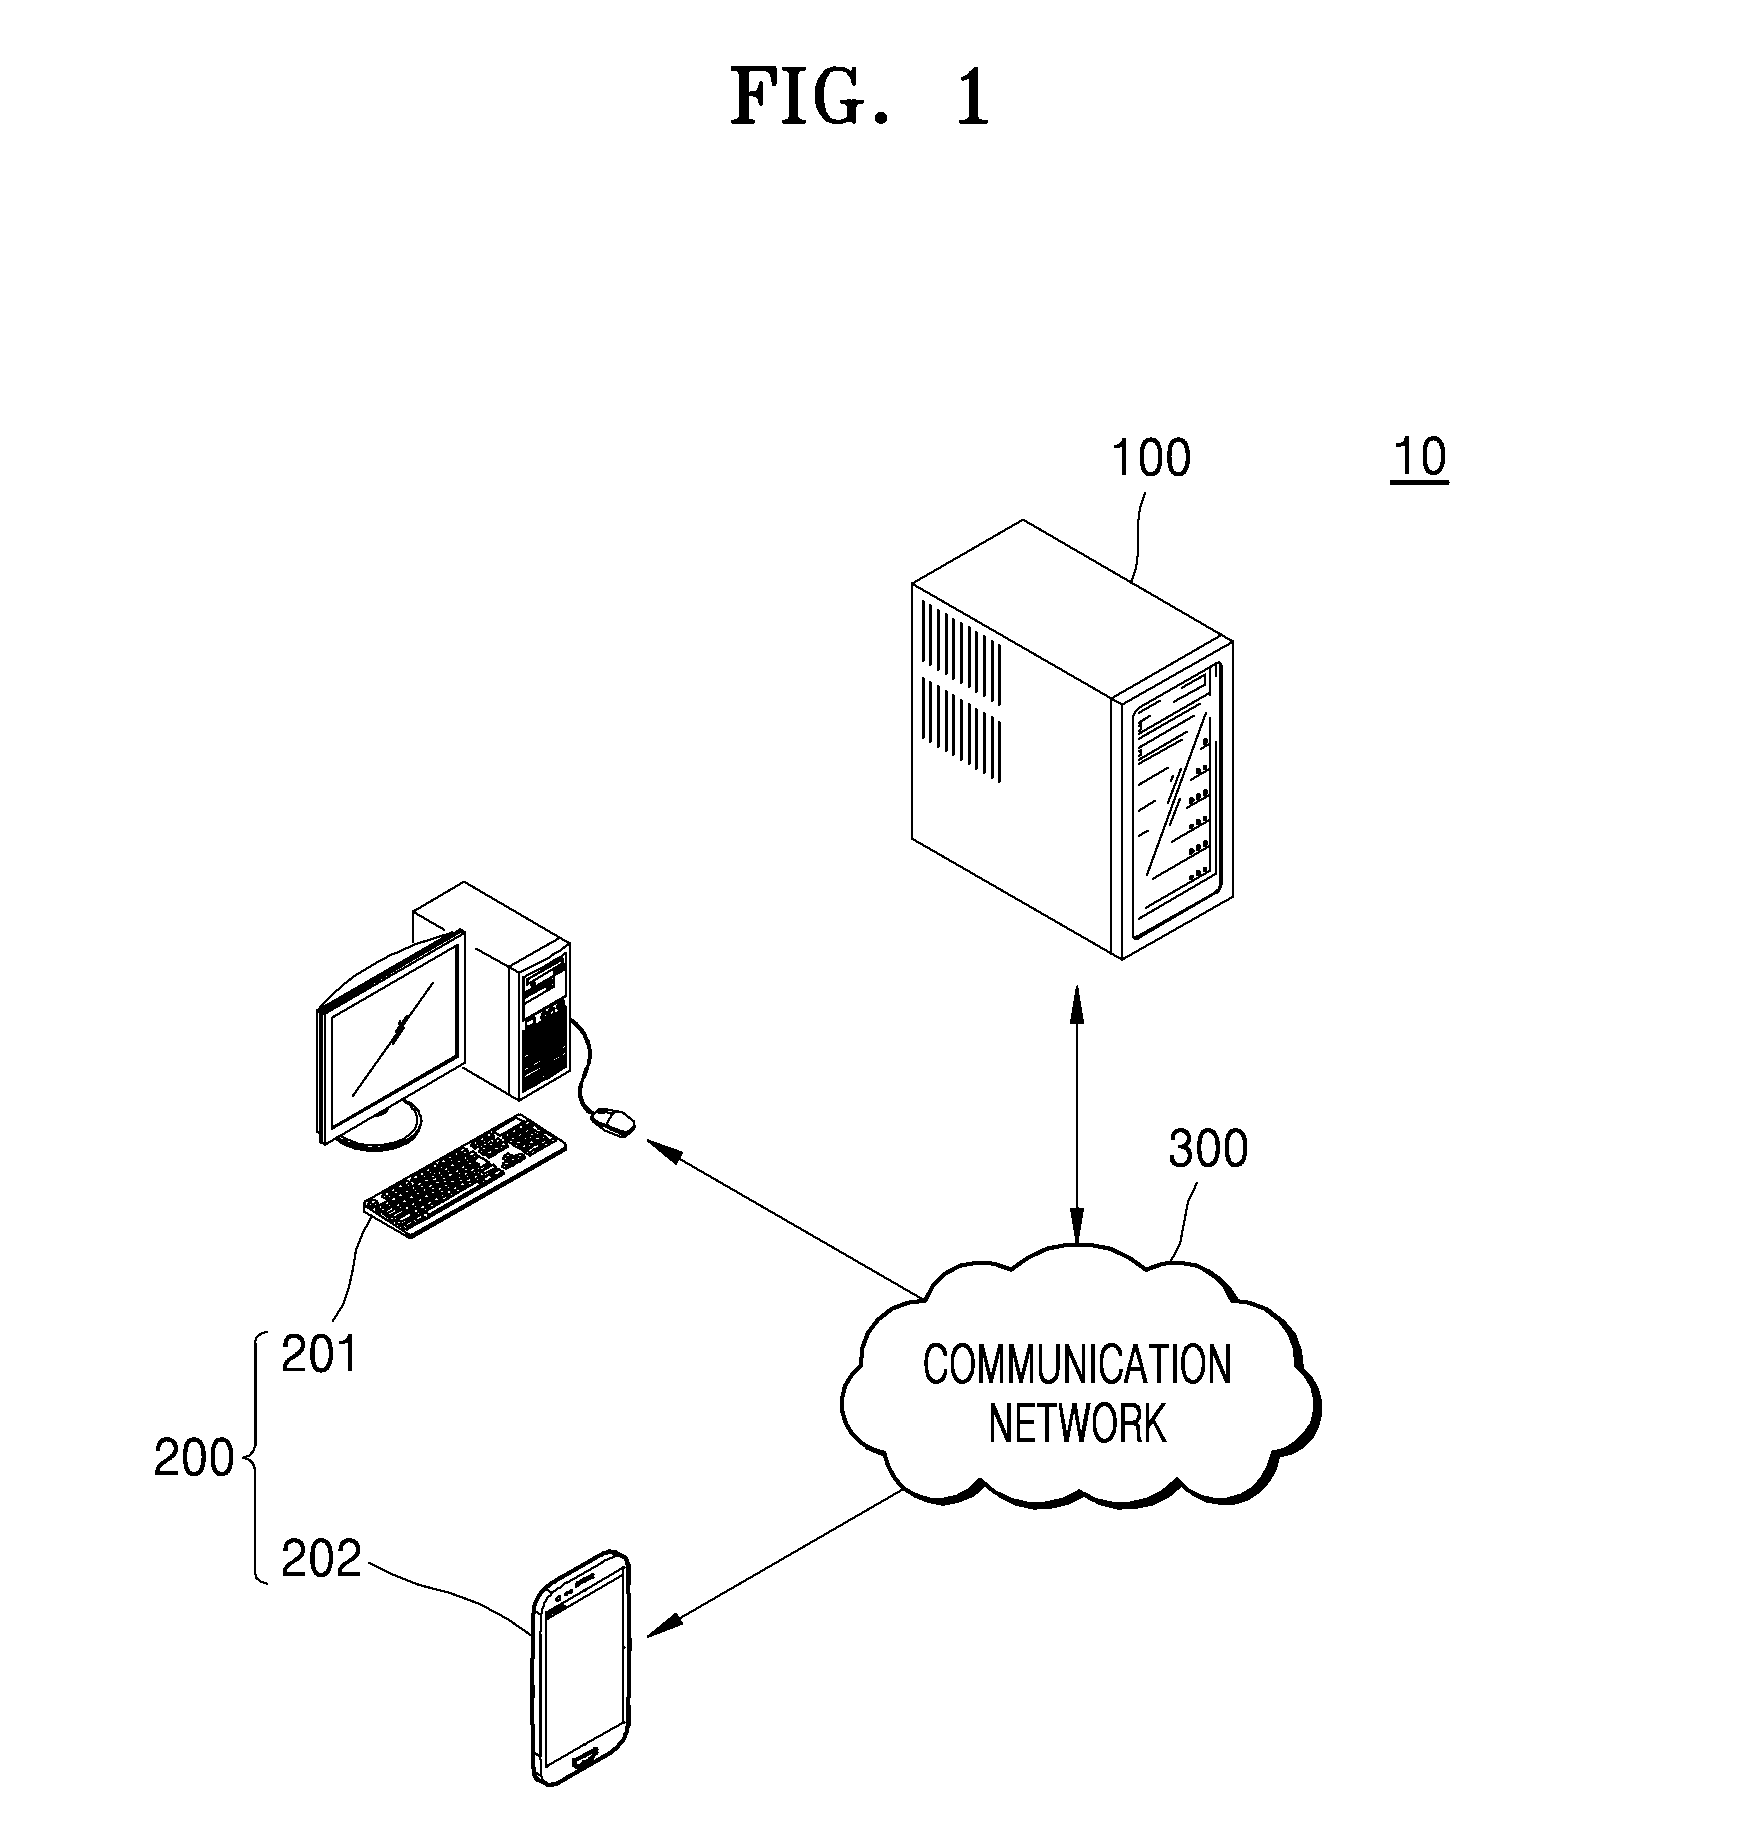 Apparatuses, systems, methods, and computer readable media for providing secure file-deletion functionality